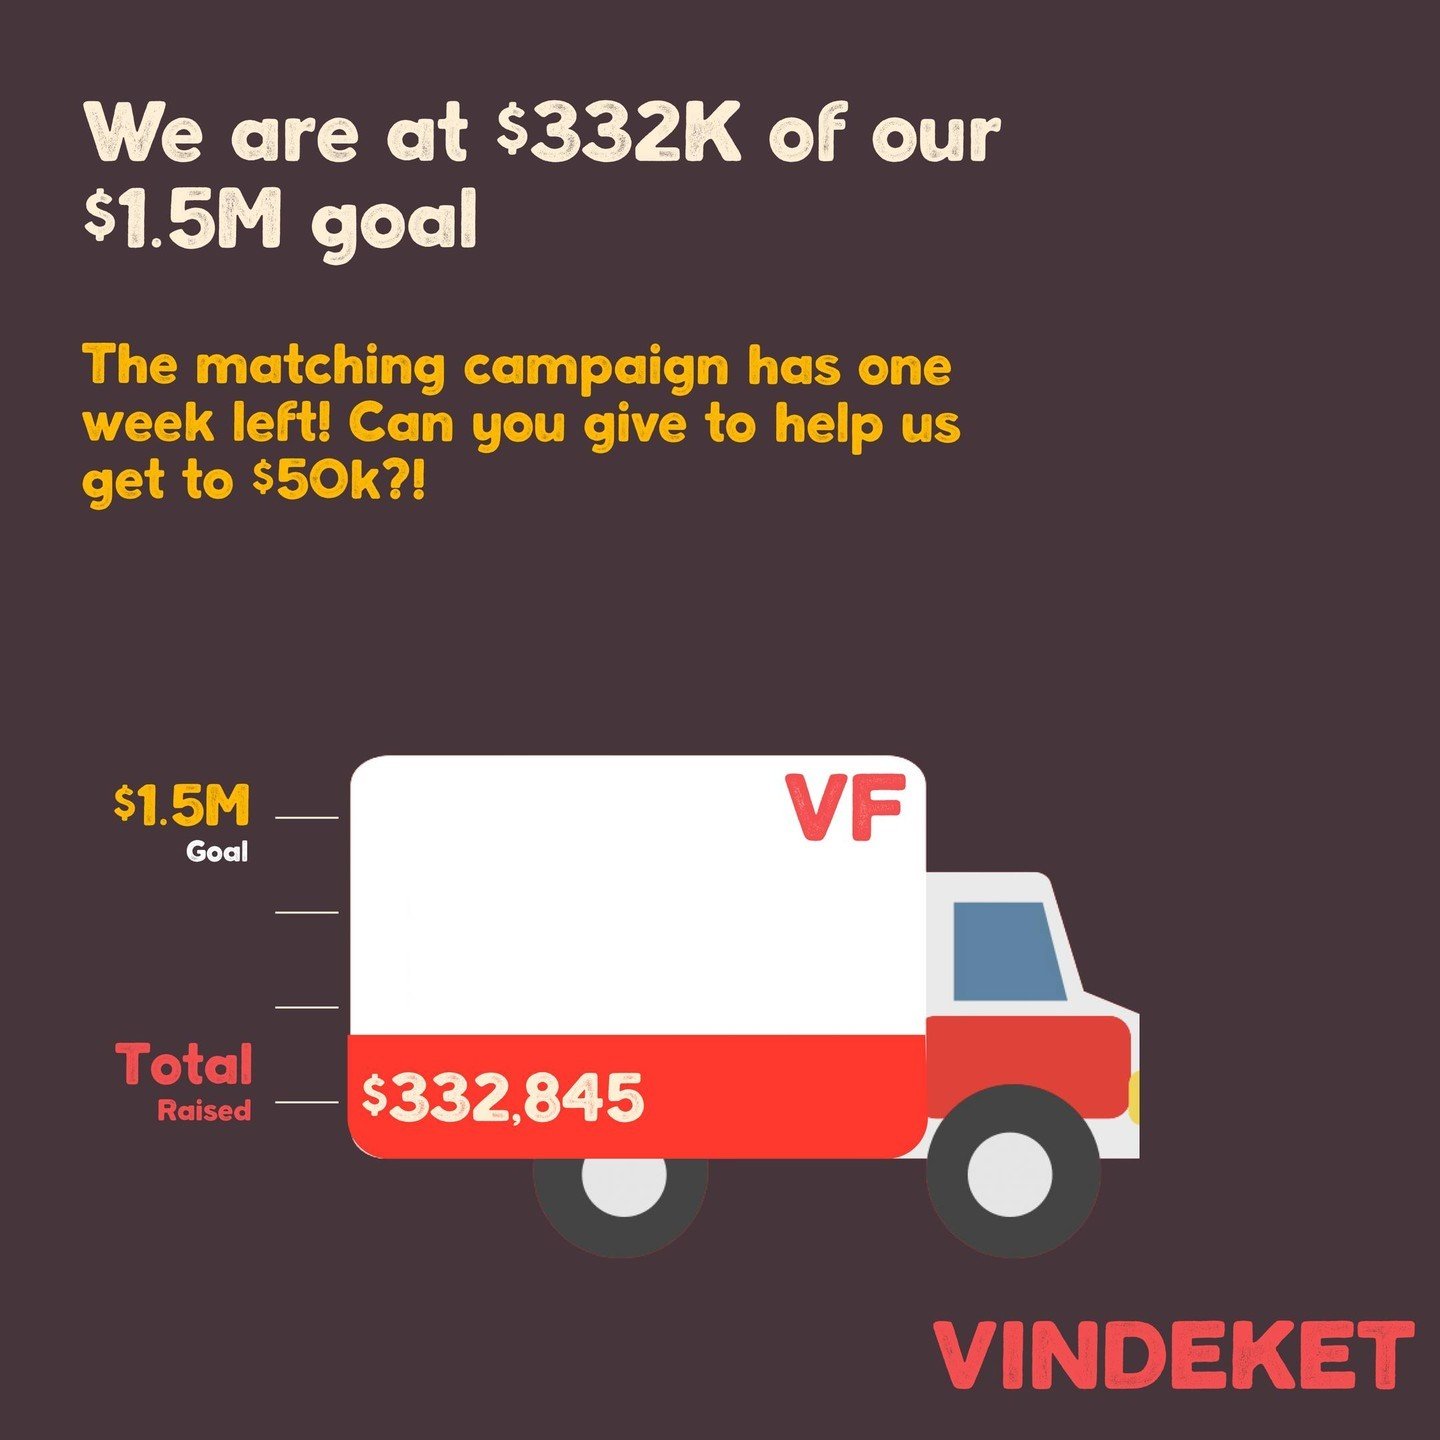 1 week left for the $25k matching campaign!⁠
We have raised $11,075 in the past three weeks. Can you give to help us reach $50k?! Thank you for your support!⁠
⁠
Donate link in Bio⁠
⁠
#FoodRescue #VindeketFoods #DonateShareServe #RootBound #FortCollin